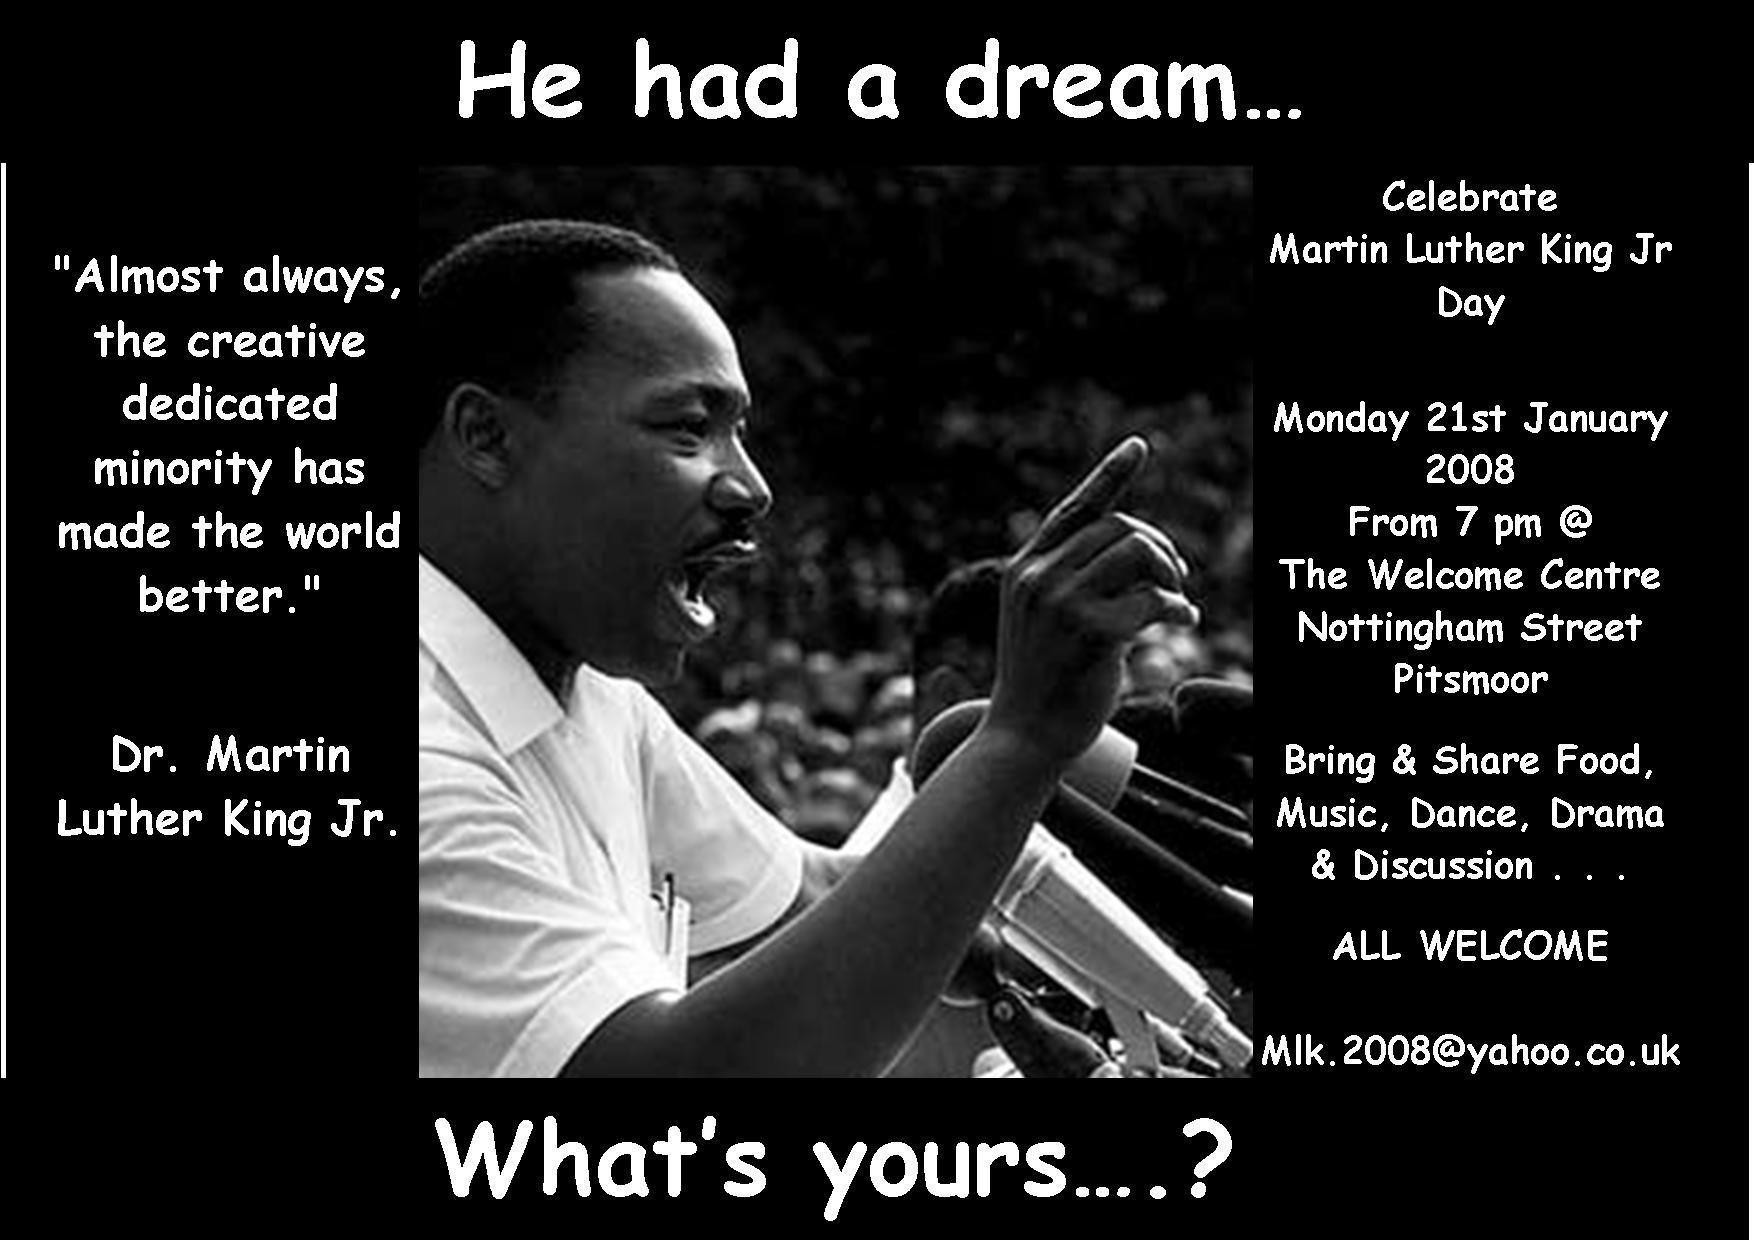 Wonderfull Martin Luther King Jr Day Quotes. tianyihengfeng. Free